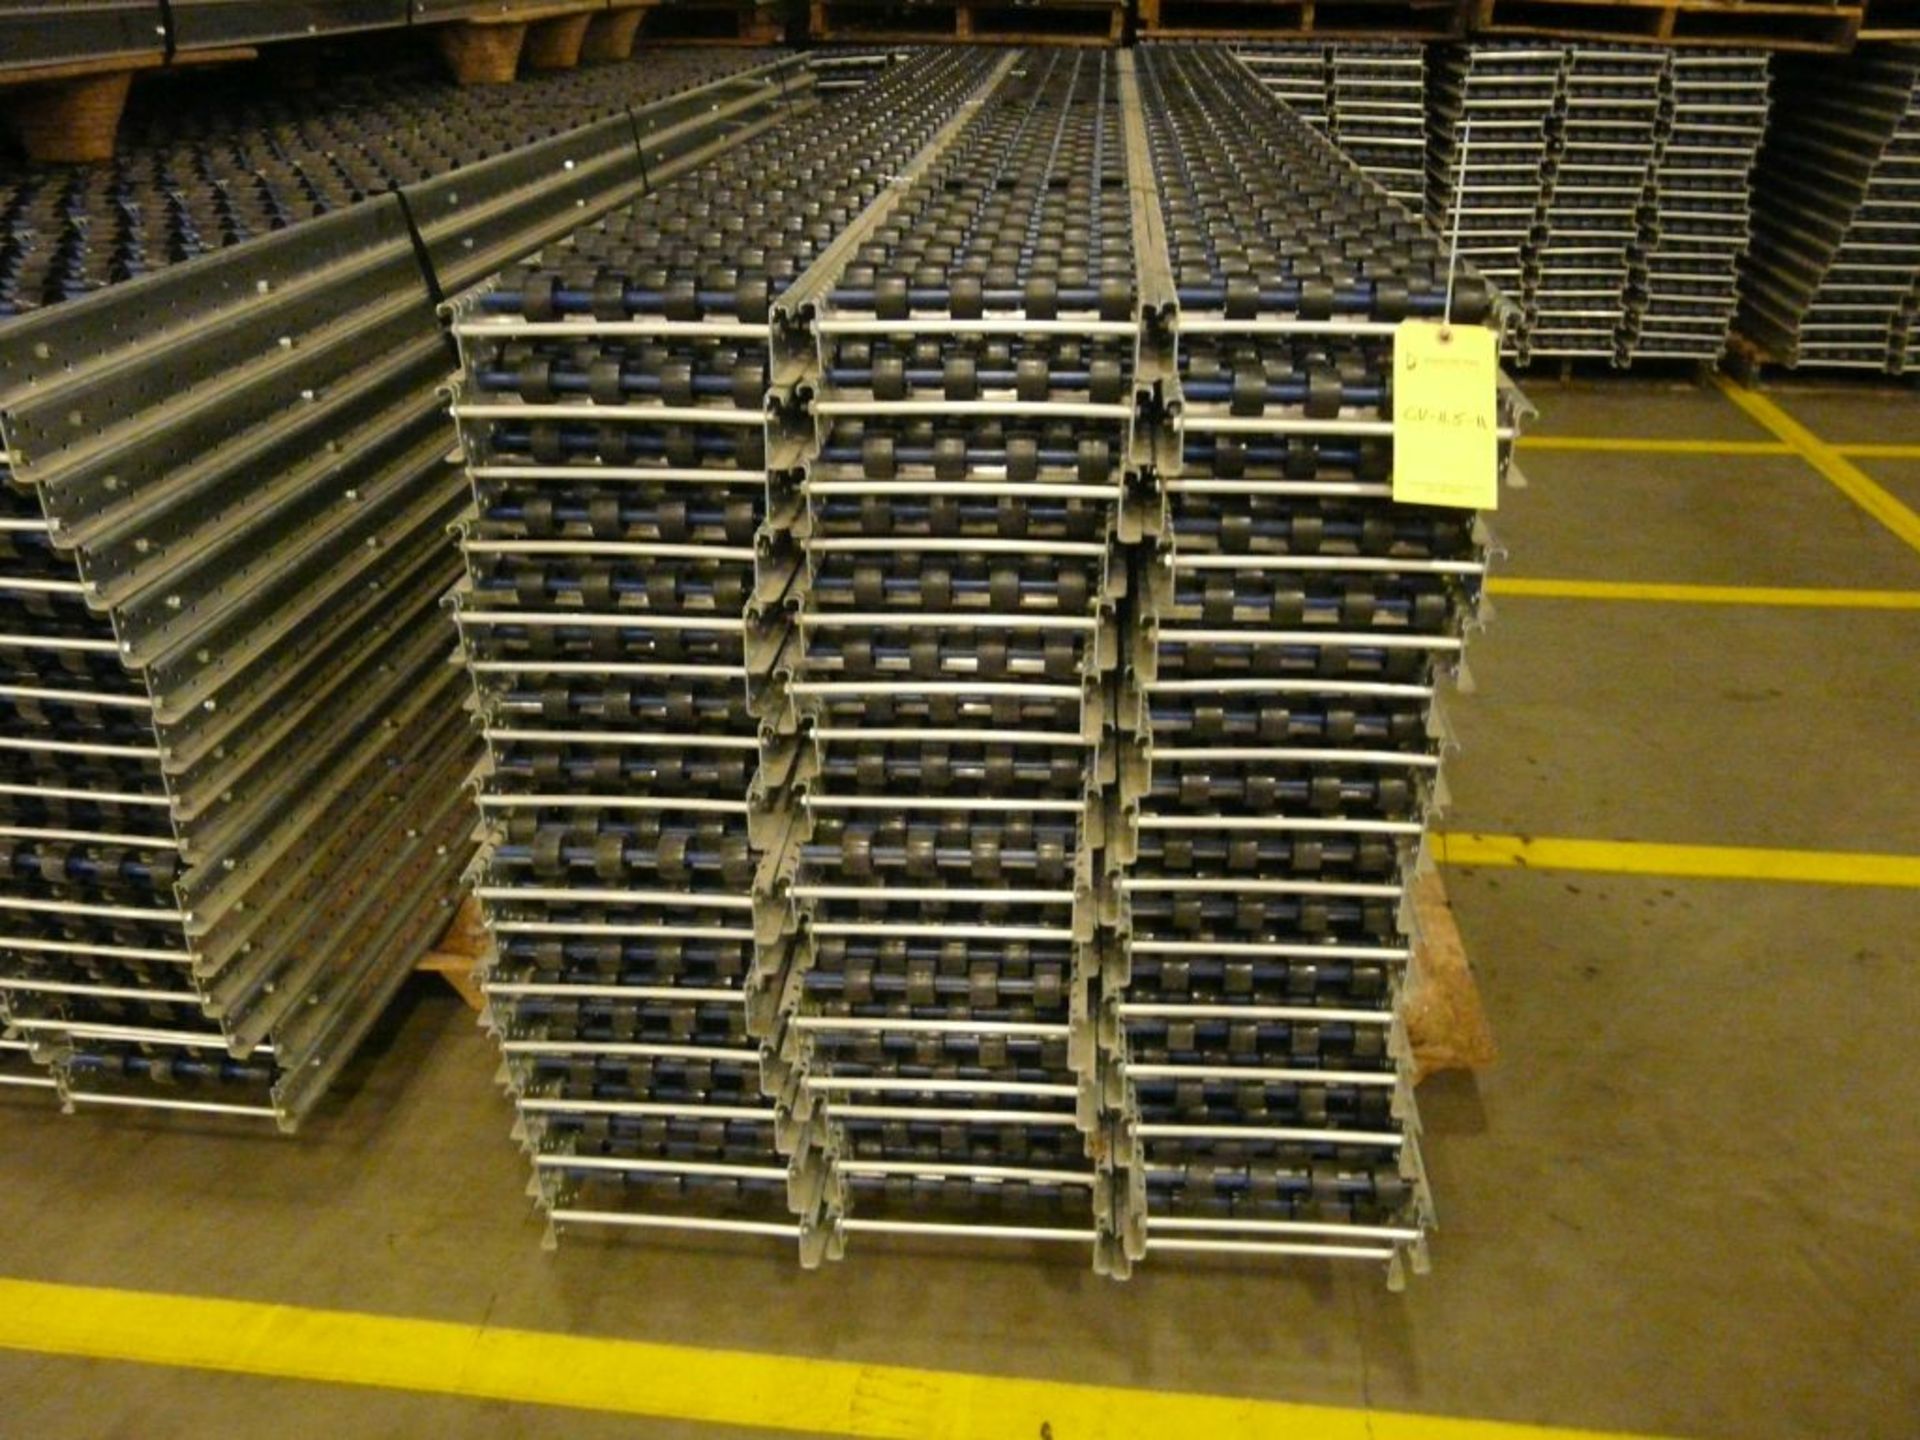 Lot of (90) SpanTrack Wheelbed Carton Flow Conveyors - 11.5'L x 11"W; Tag: 224195 - $30 Lot - Image 2 of 4